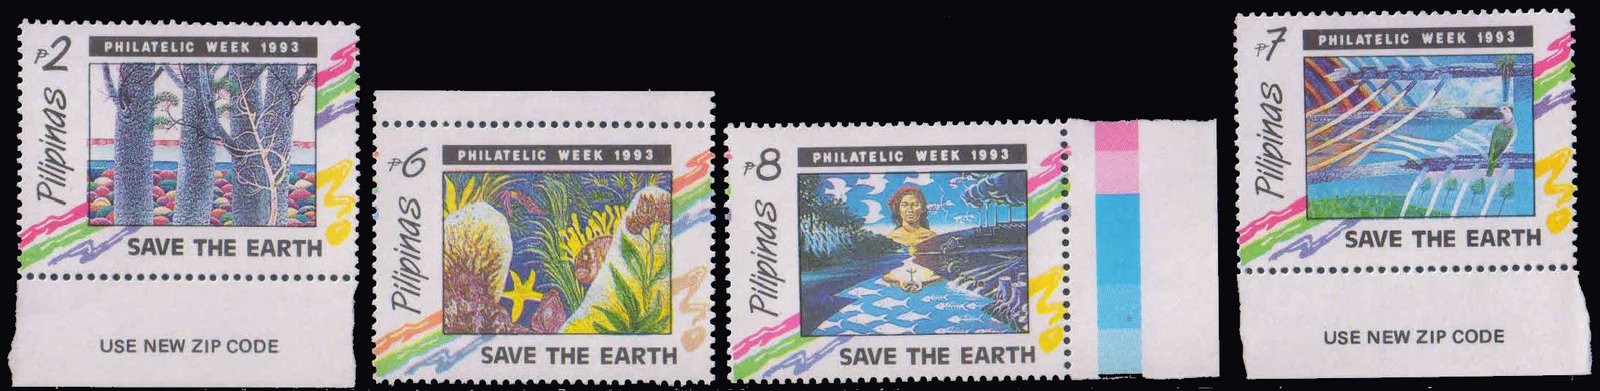 PHILIPPINES 1983-Save the Earth, Philatelic Week, Trees, Marine Flora & Fauna, Dove & Irrigation System, Pollution, Set of 4, MNH, S.G. 2583-86-Cat £ 8-